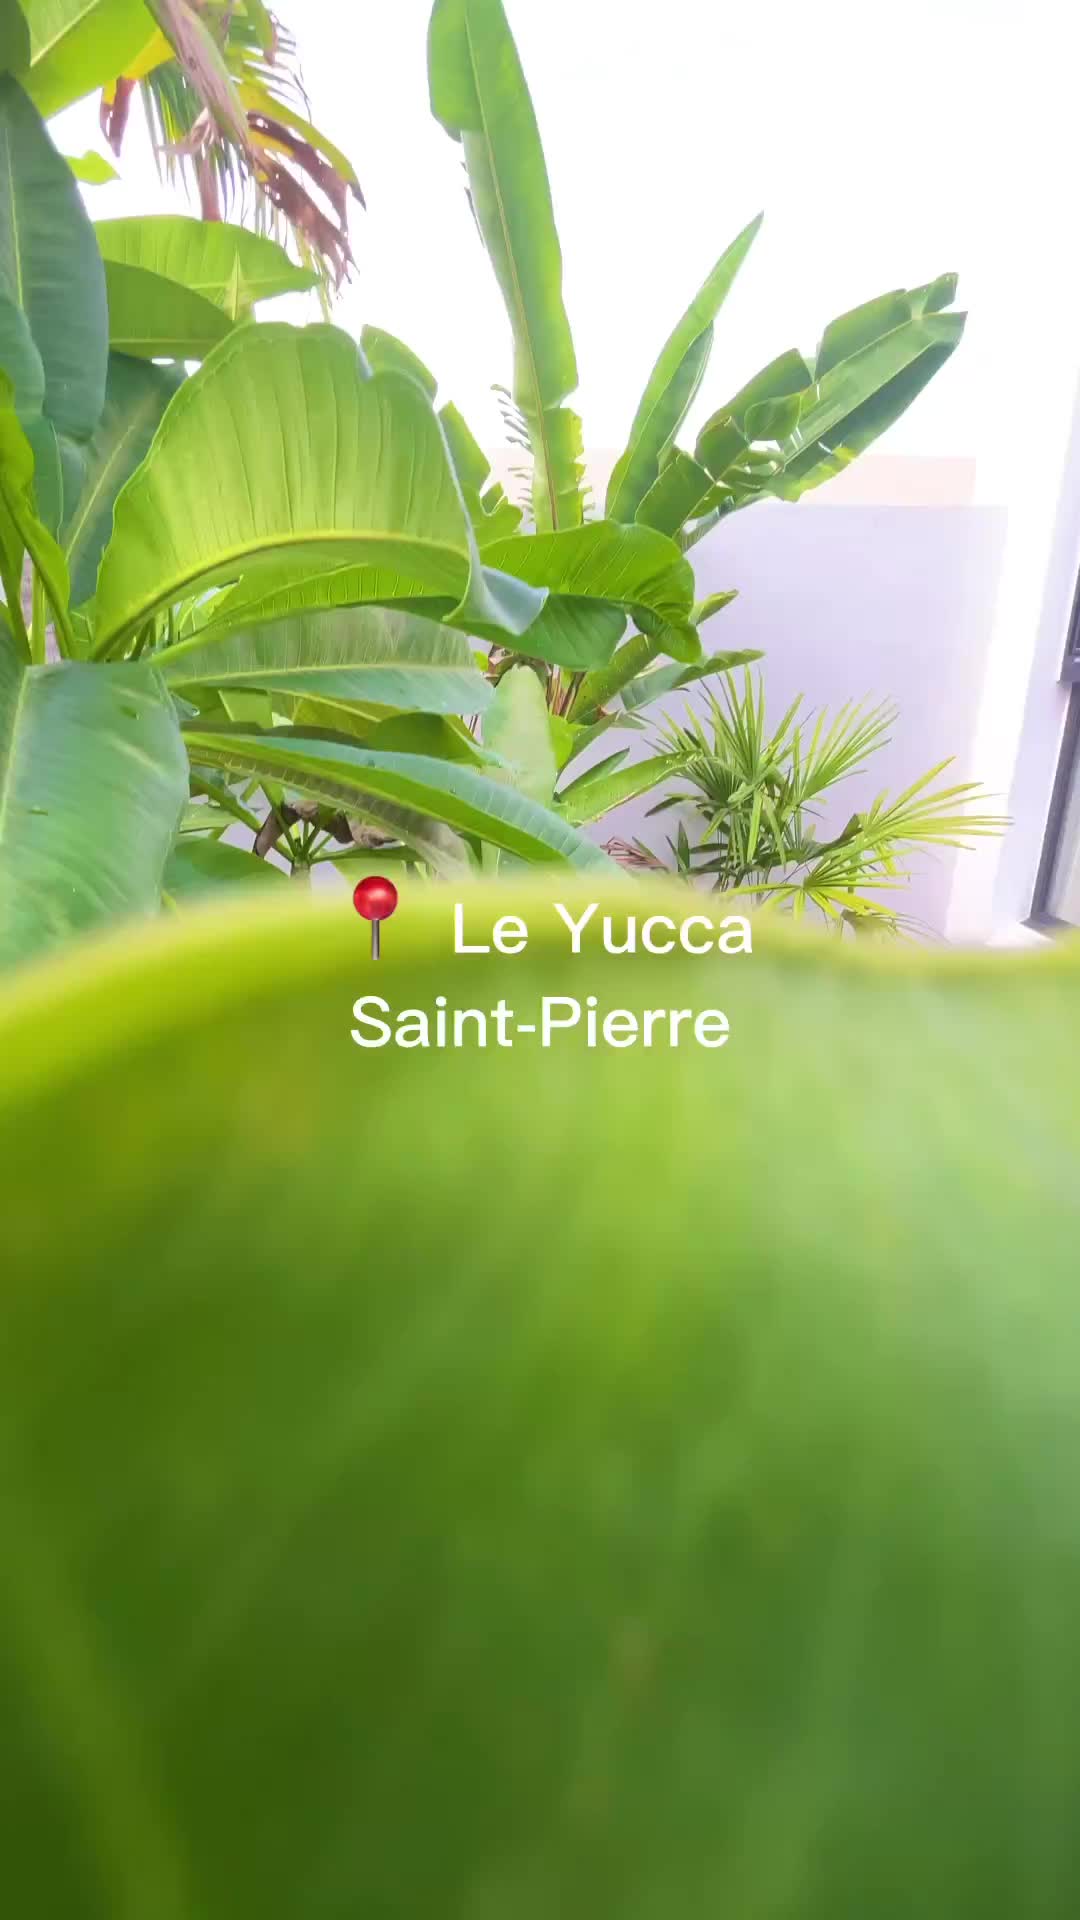 Discover Luxurious Comfort at Le Yucca, Saint Pierre 🌴